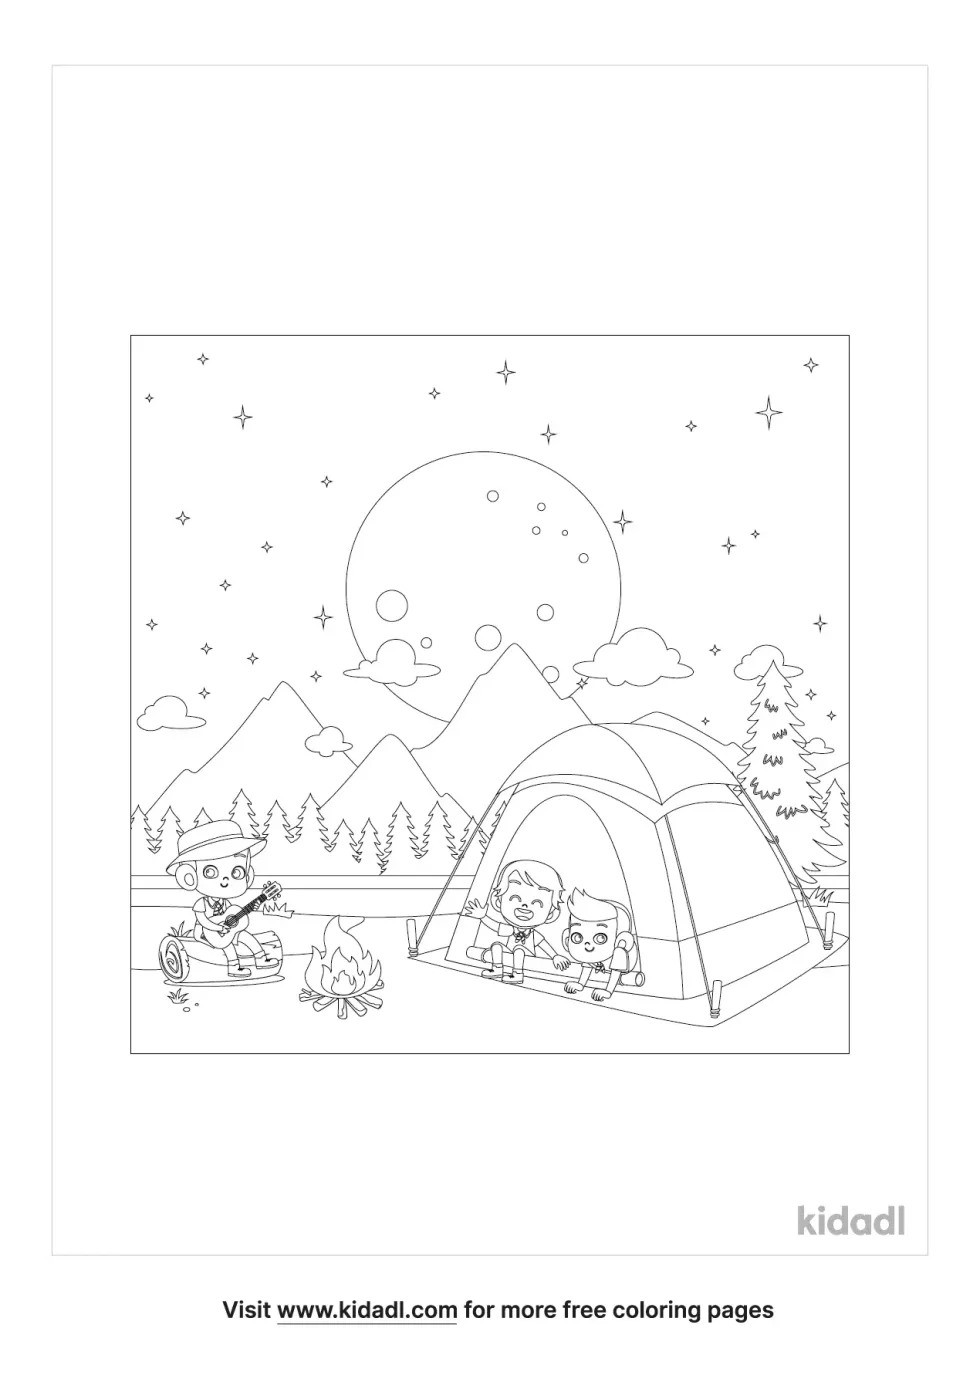 Kids In A Tent Coloring Page